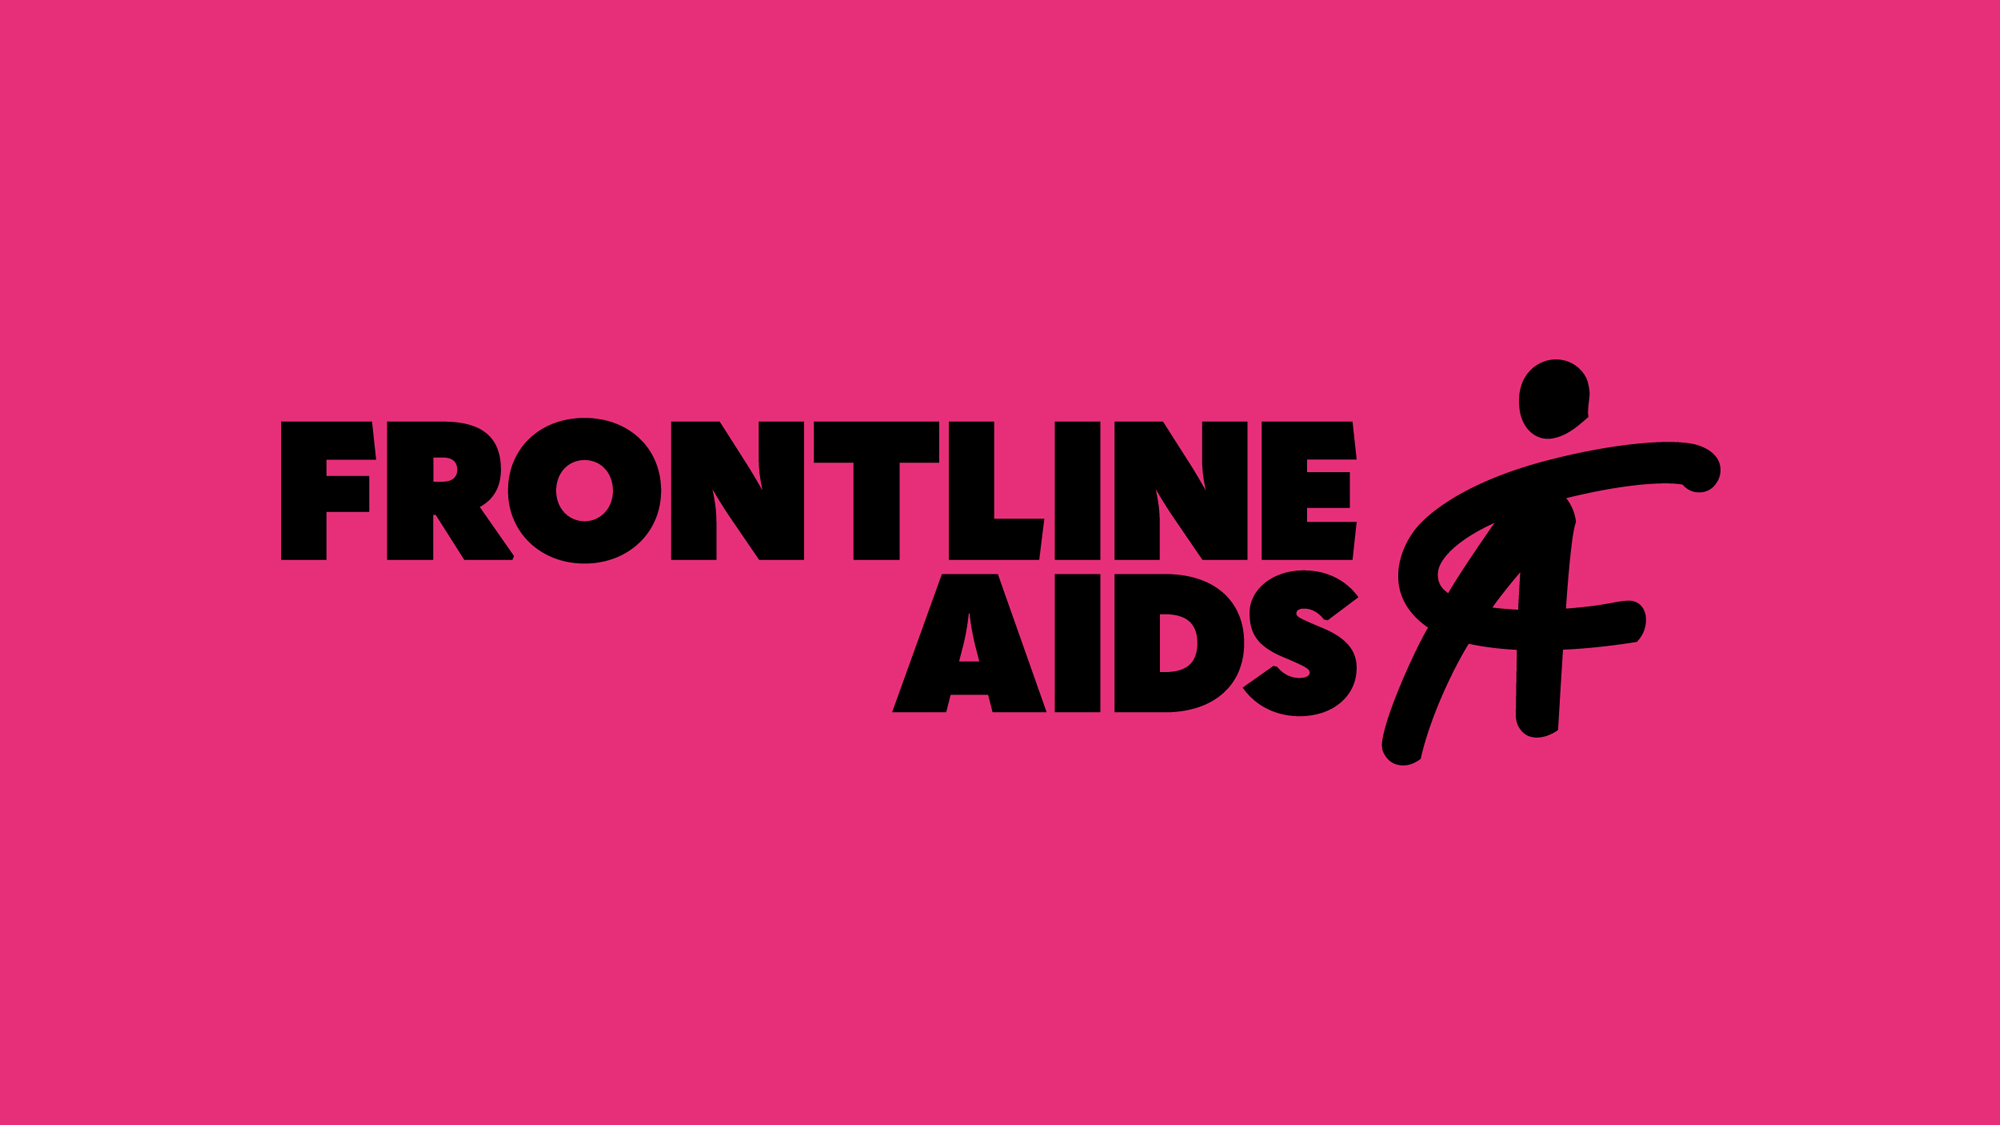 Aids Logo - Brand New: New Logo and Identity for Frontline Aids